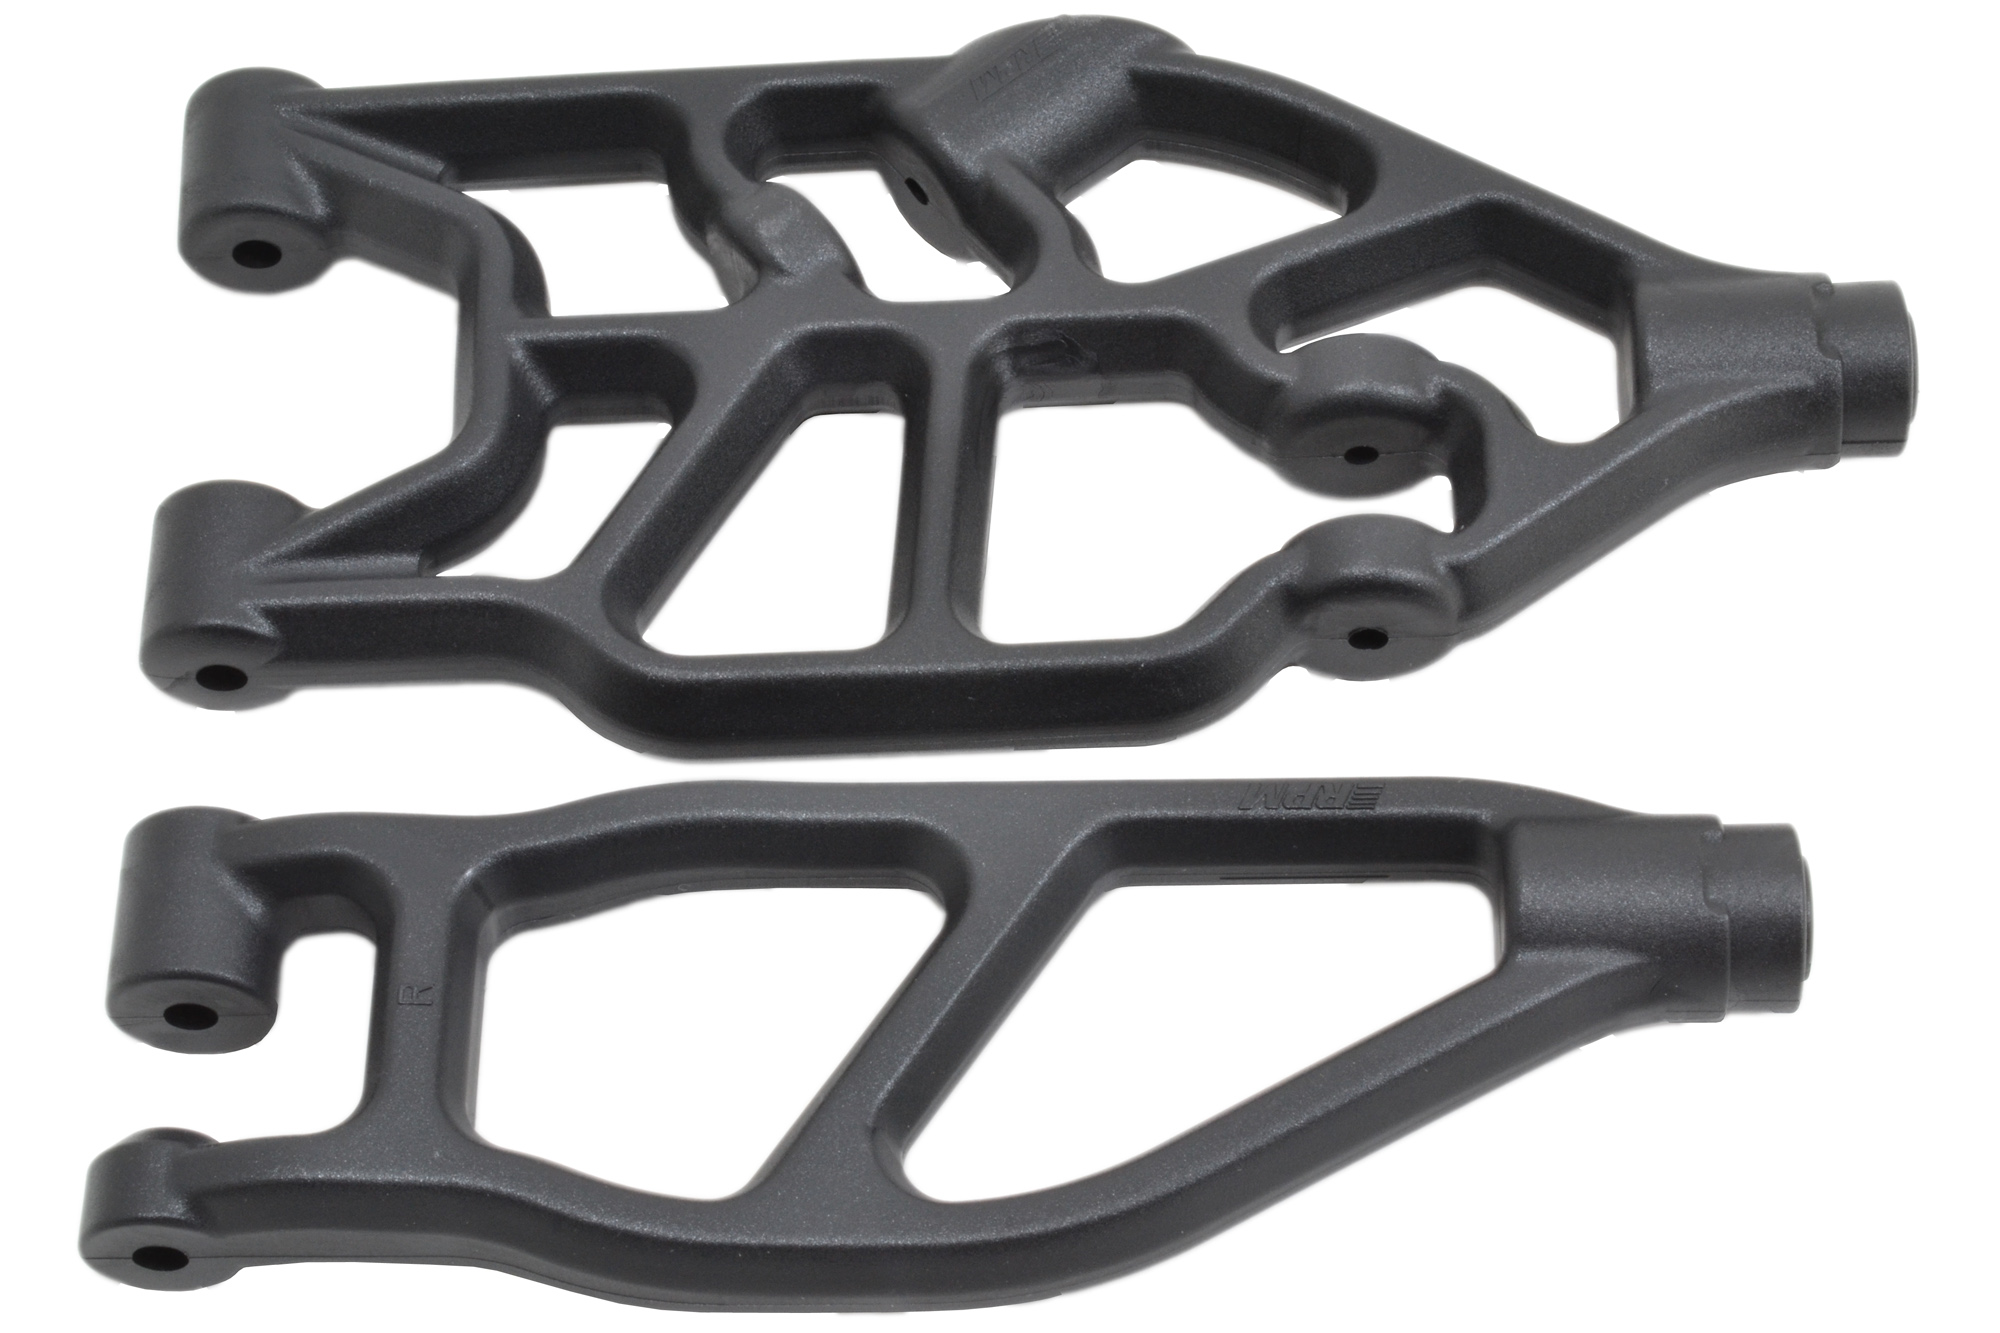 RPM 81482 Front Upper Lower A-arms for Arrma Kraton Talion Outcast Rpm81482 for sale online 